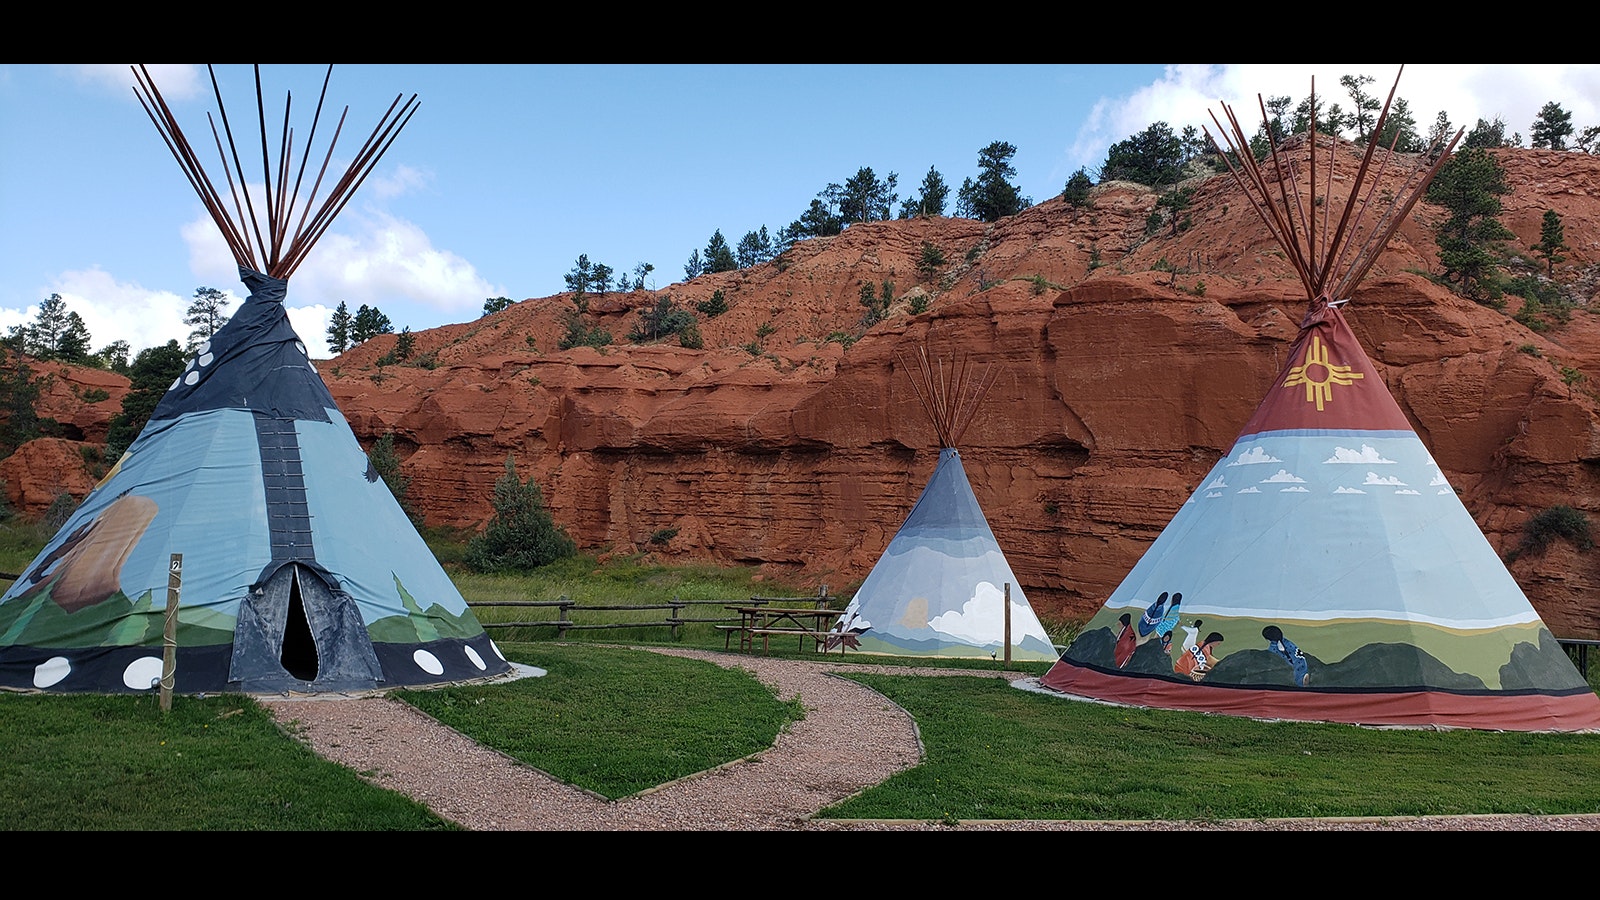 Red canyon walls make a dramatic backdrop for the teepees at the Devils Tower KOA. Scenes are painted on the teepee depicting American Indian legends about the tower, which was known to them as Bear Lodge.